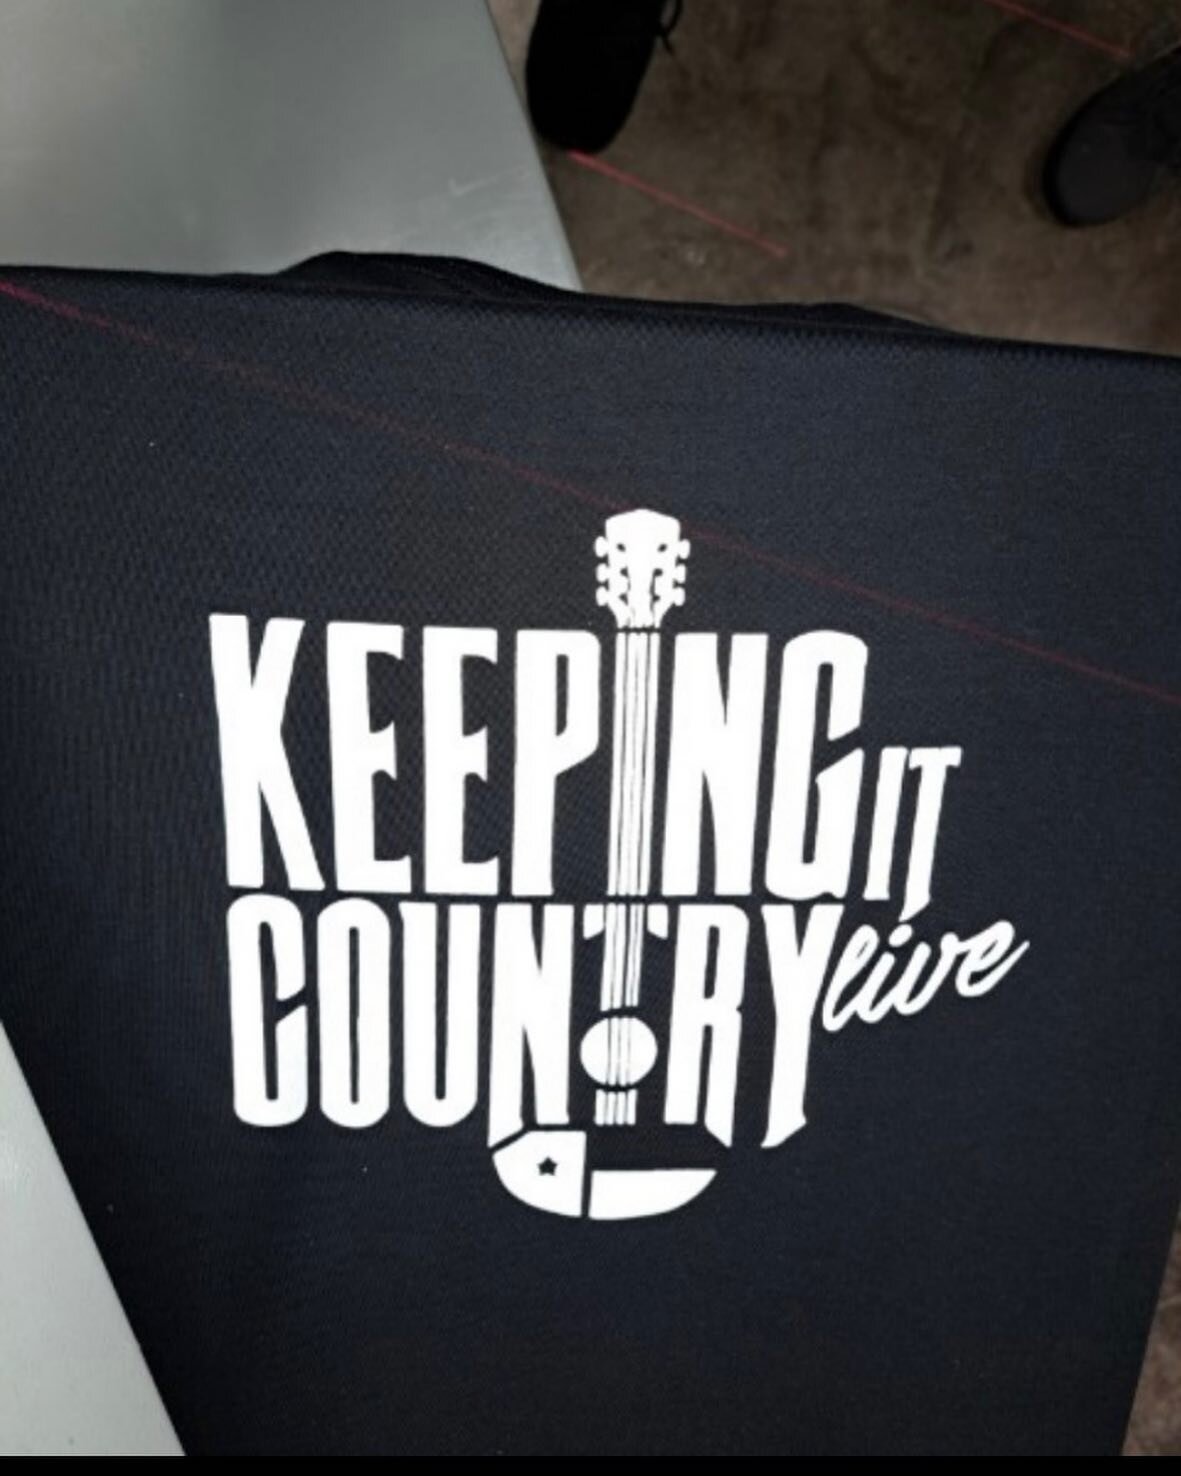 We were thrilled to make these shirts for country music singer, songwriter, Dave Gore!
🎵 🧩 🎵🧩
@davegoremusic